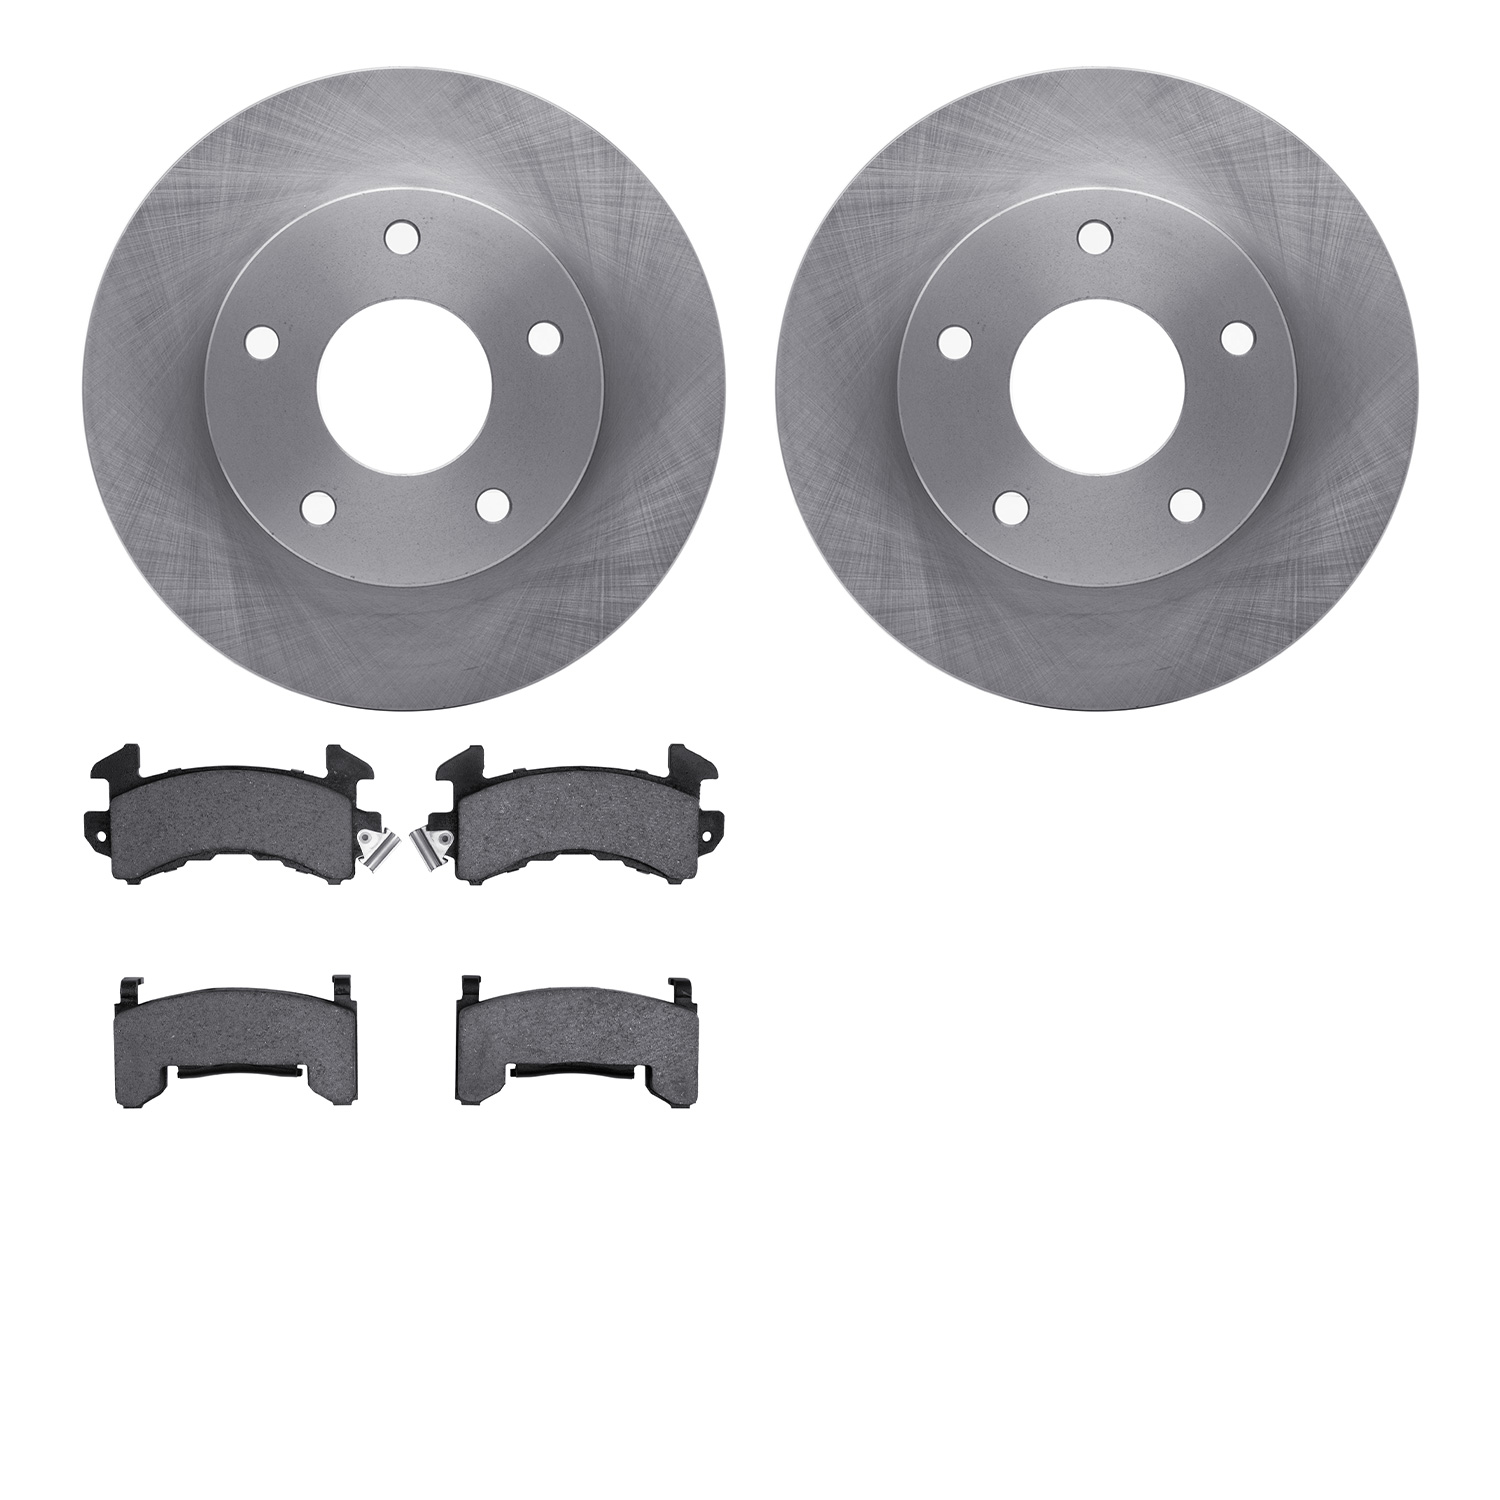 6402-48004 Brake Rotors with Ultimate-Duty Brake Pads, 1979-1998 GM, Position: Front